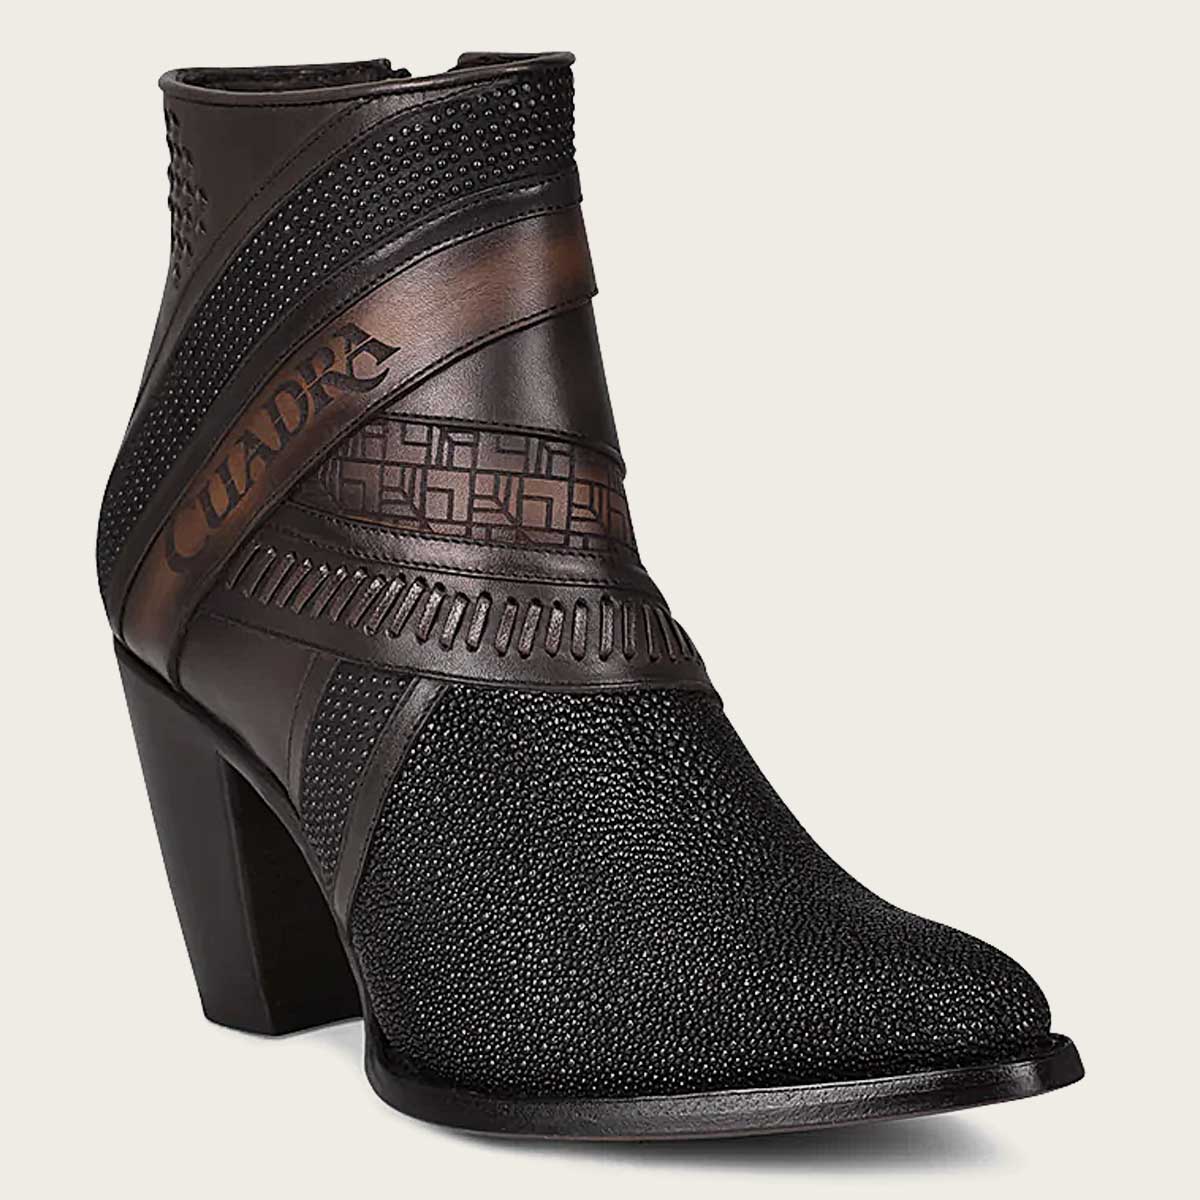 black leather ankle boots, hand-painted , engraved with Cuadra logo